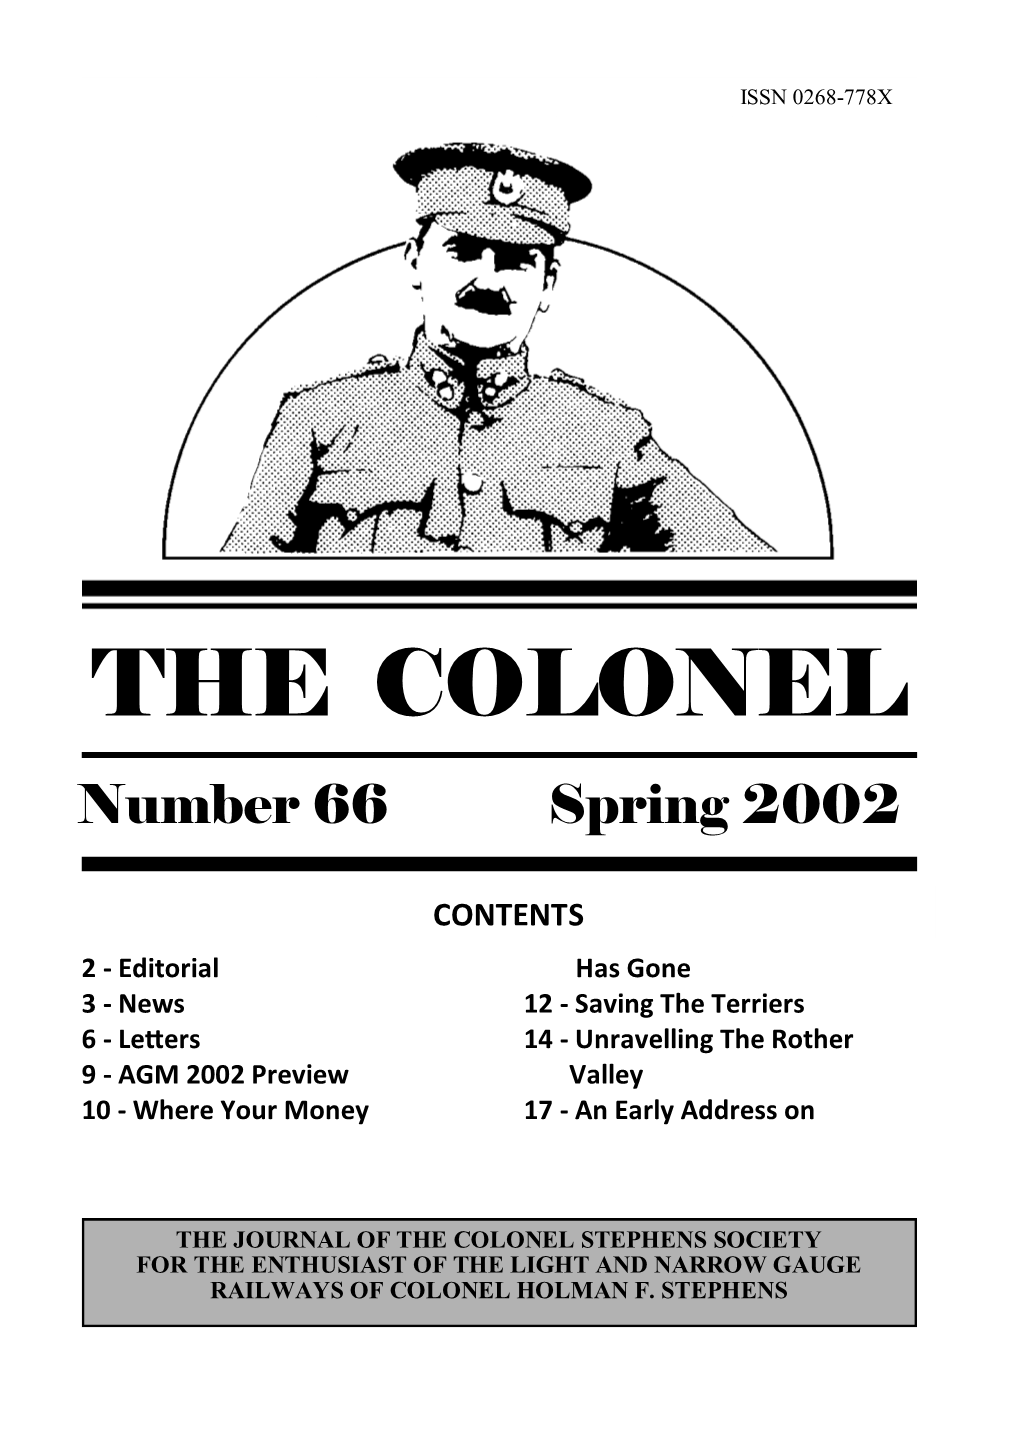 The Colonel 66 Issn 0268-778X1